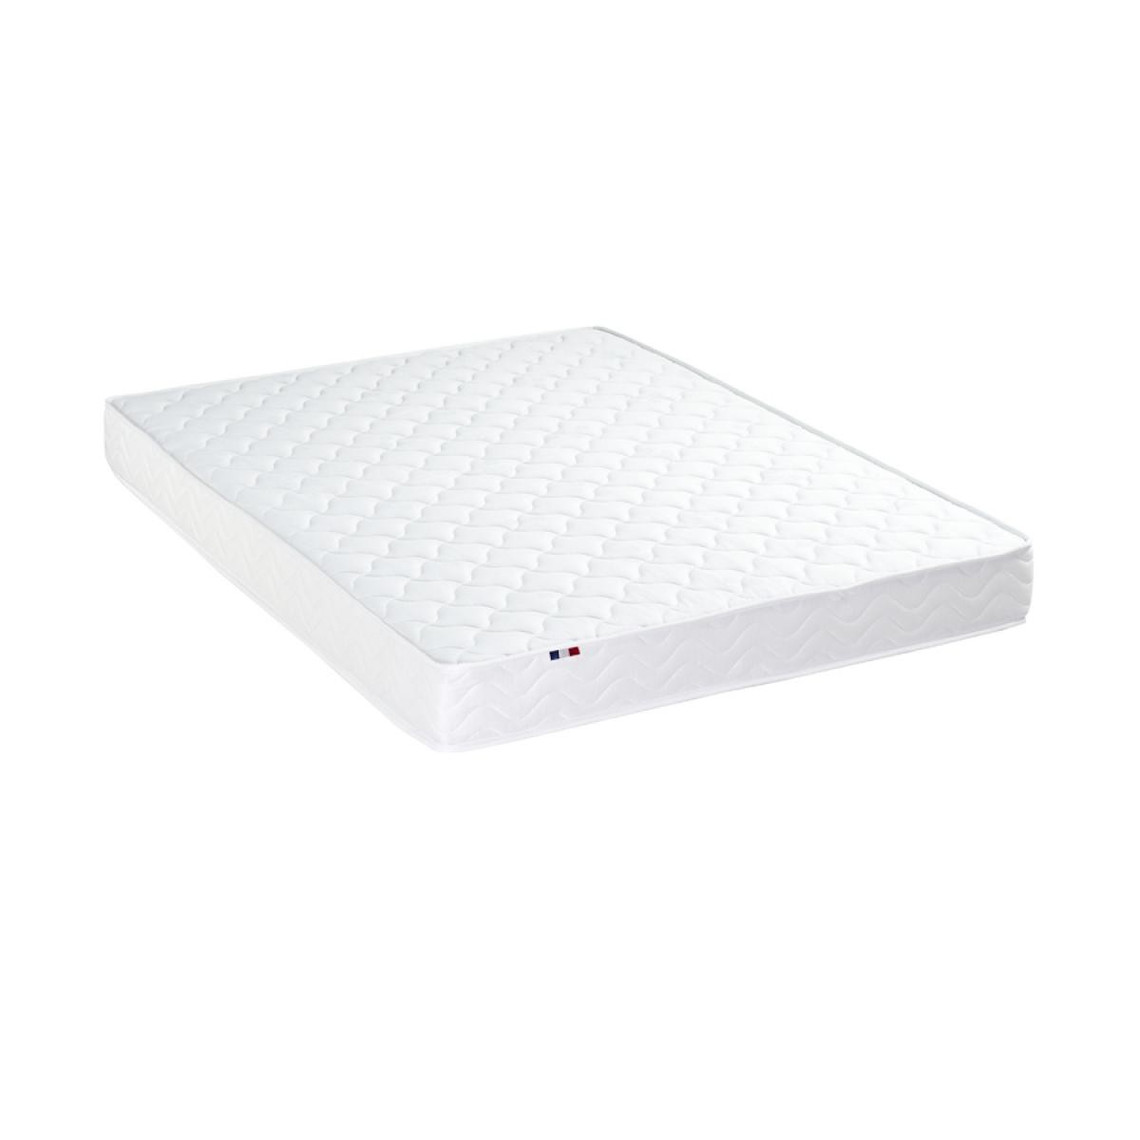 Matelas Ressorts Fermes biconiques SPECTOS - Made in France